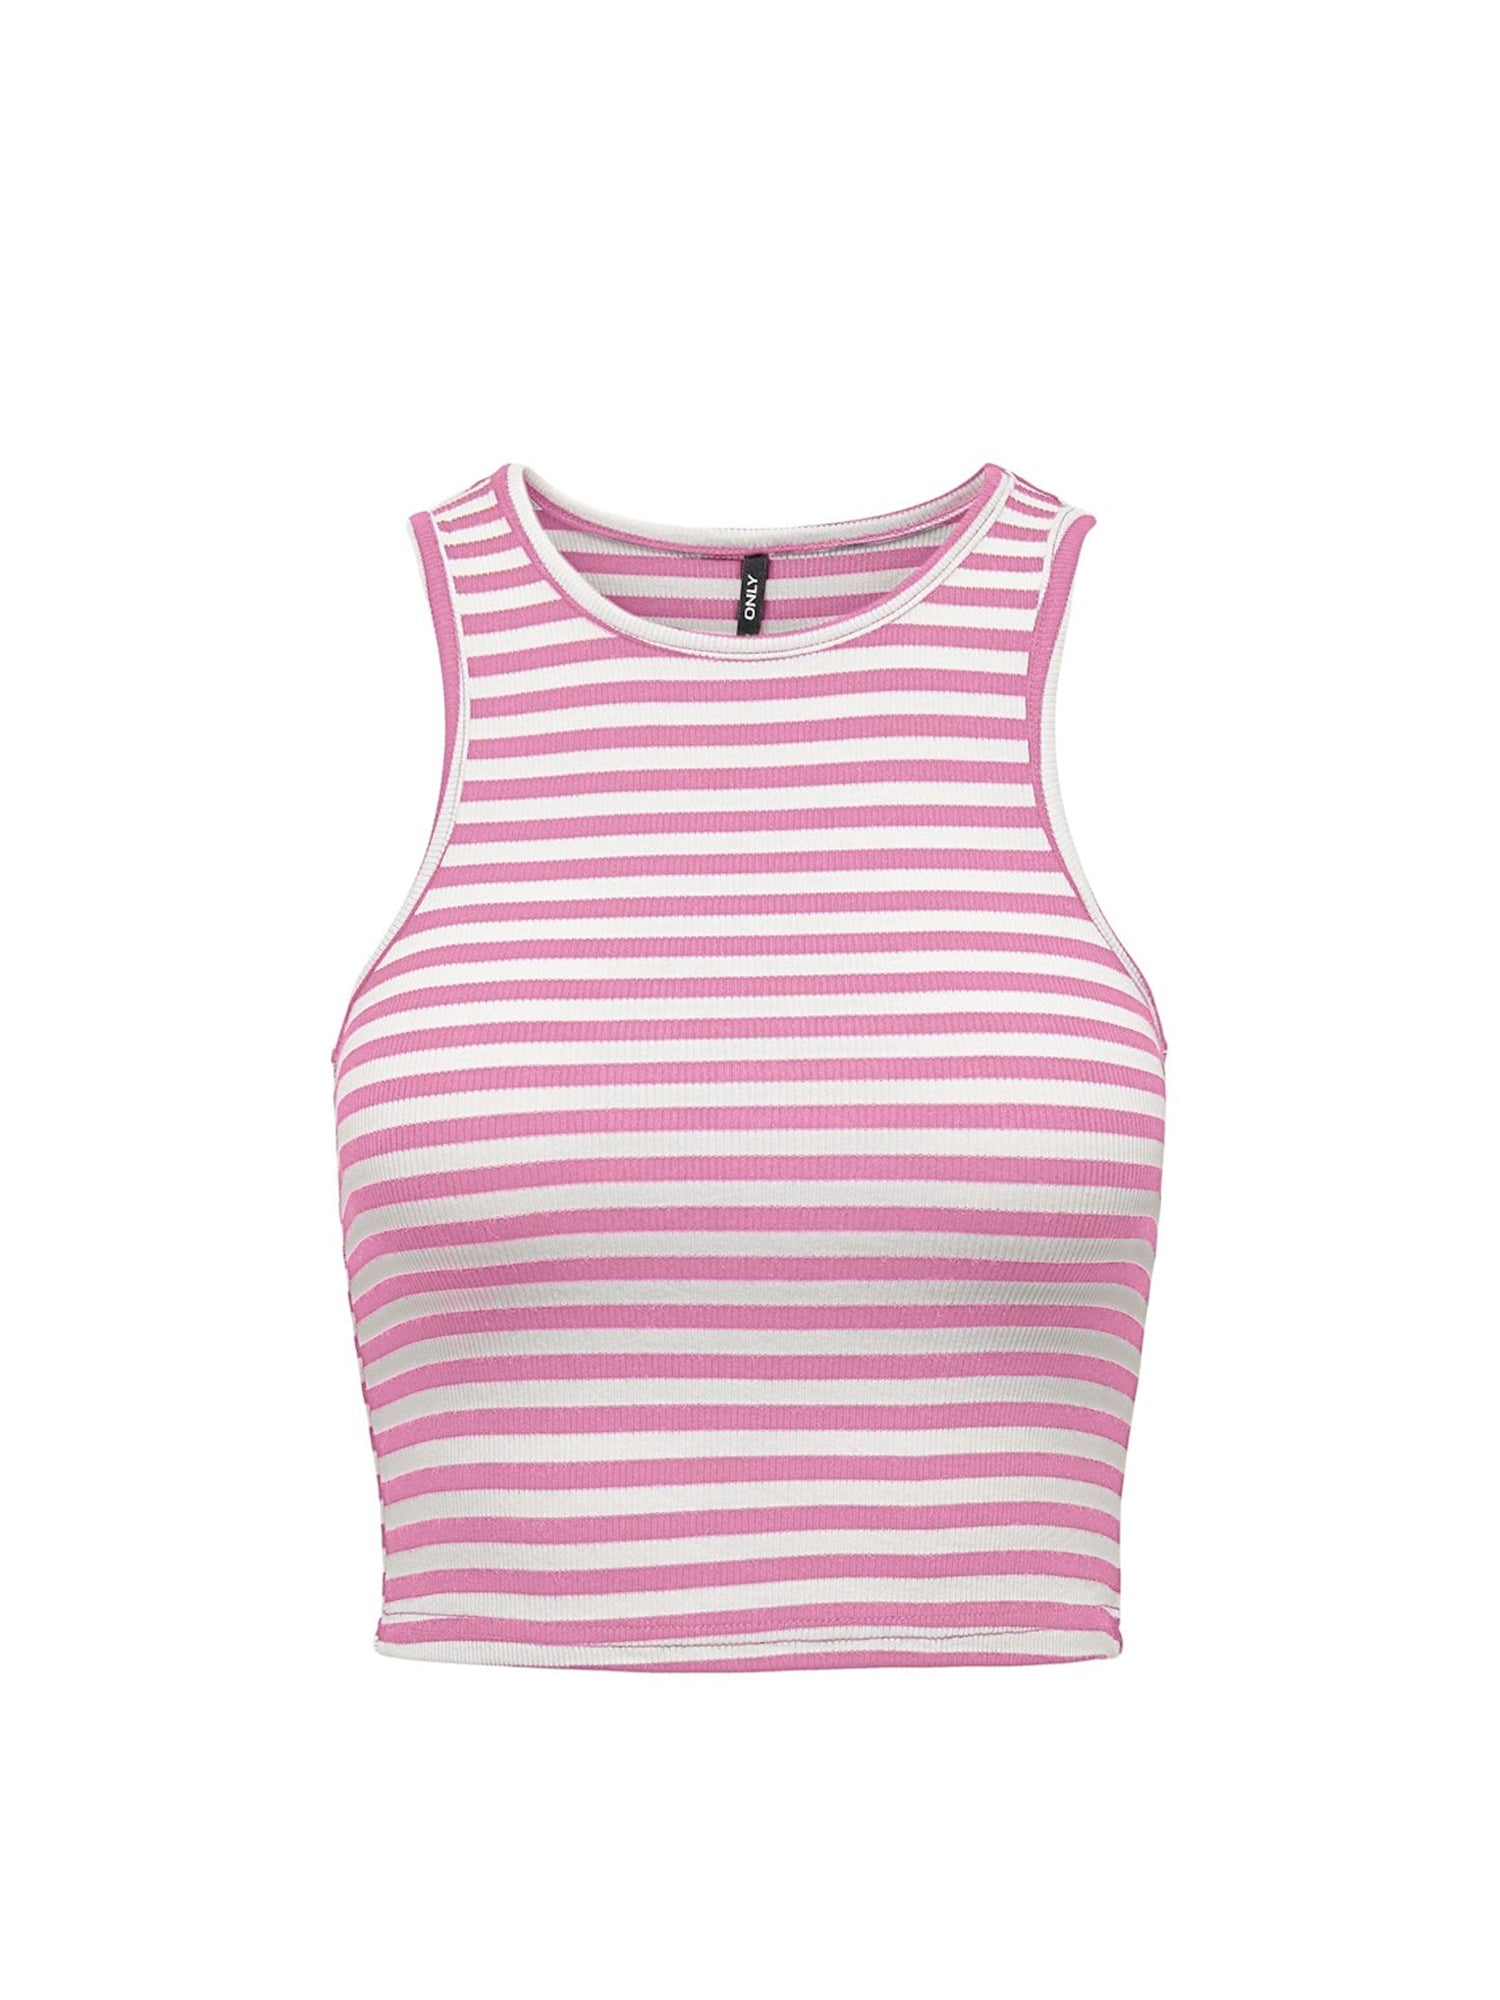 ONLY TOP CROP BELIA A RIGHE ROSA - BIANCO